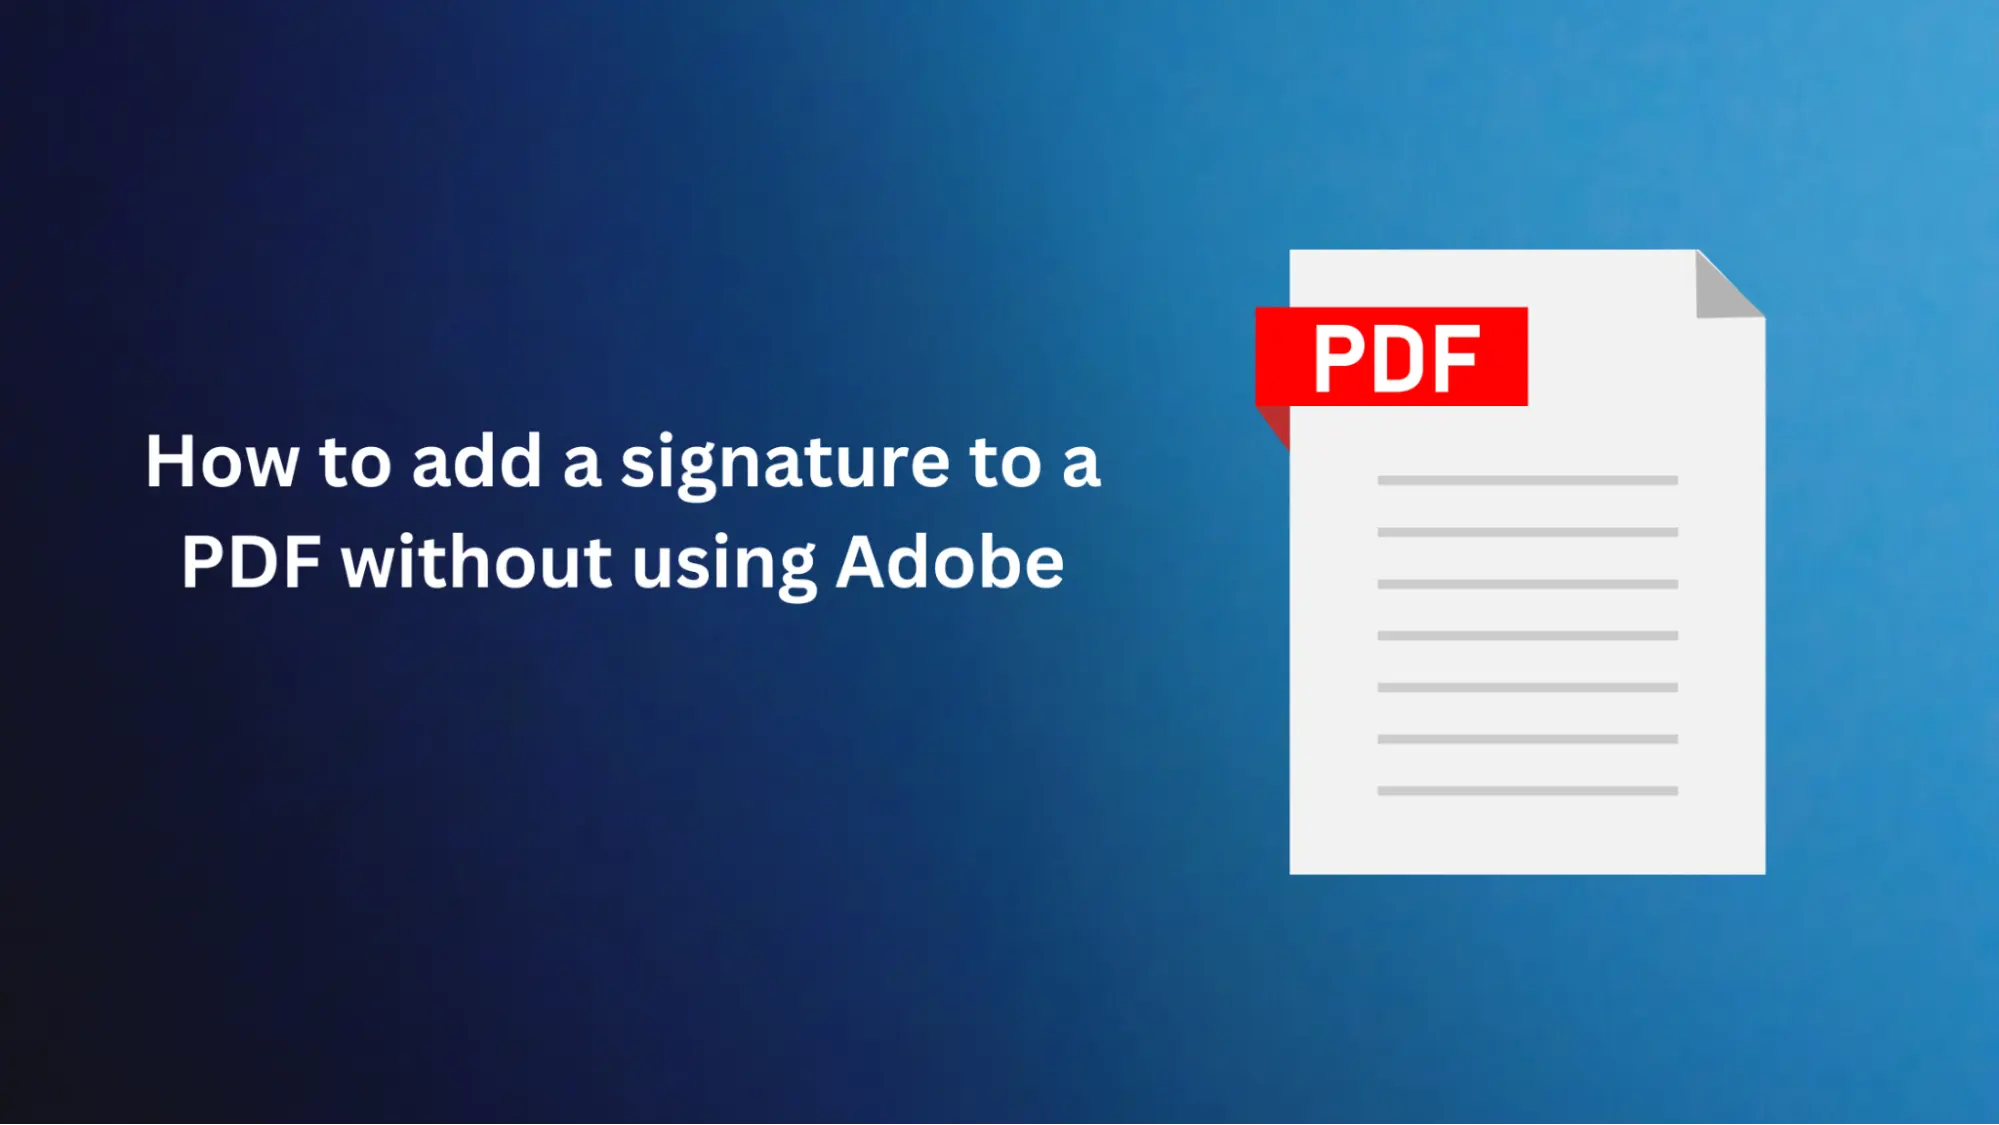 How to add a signature to a PDF without using Adobe